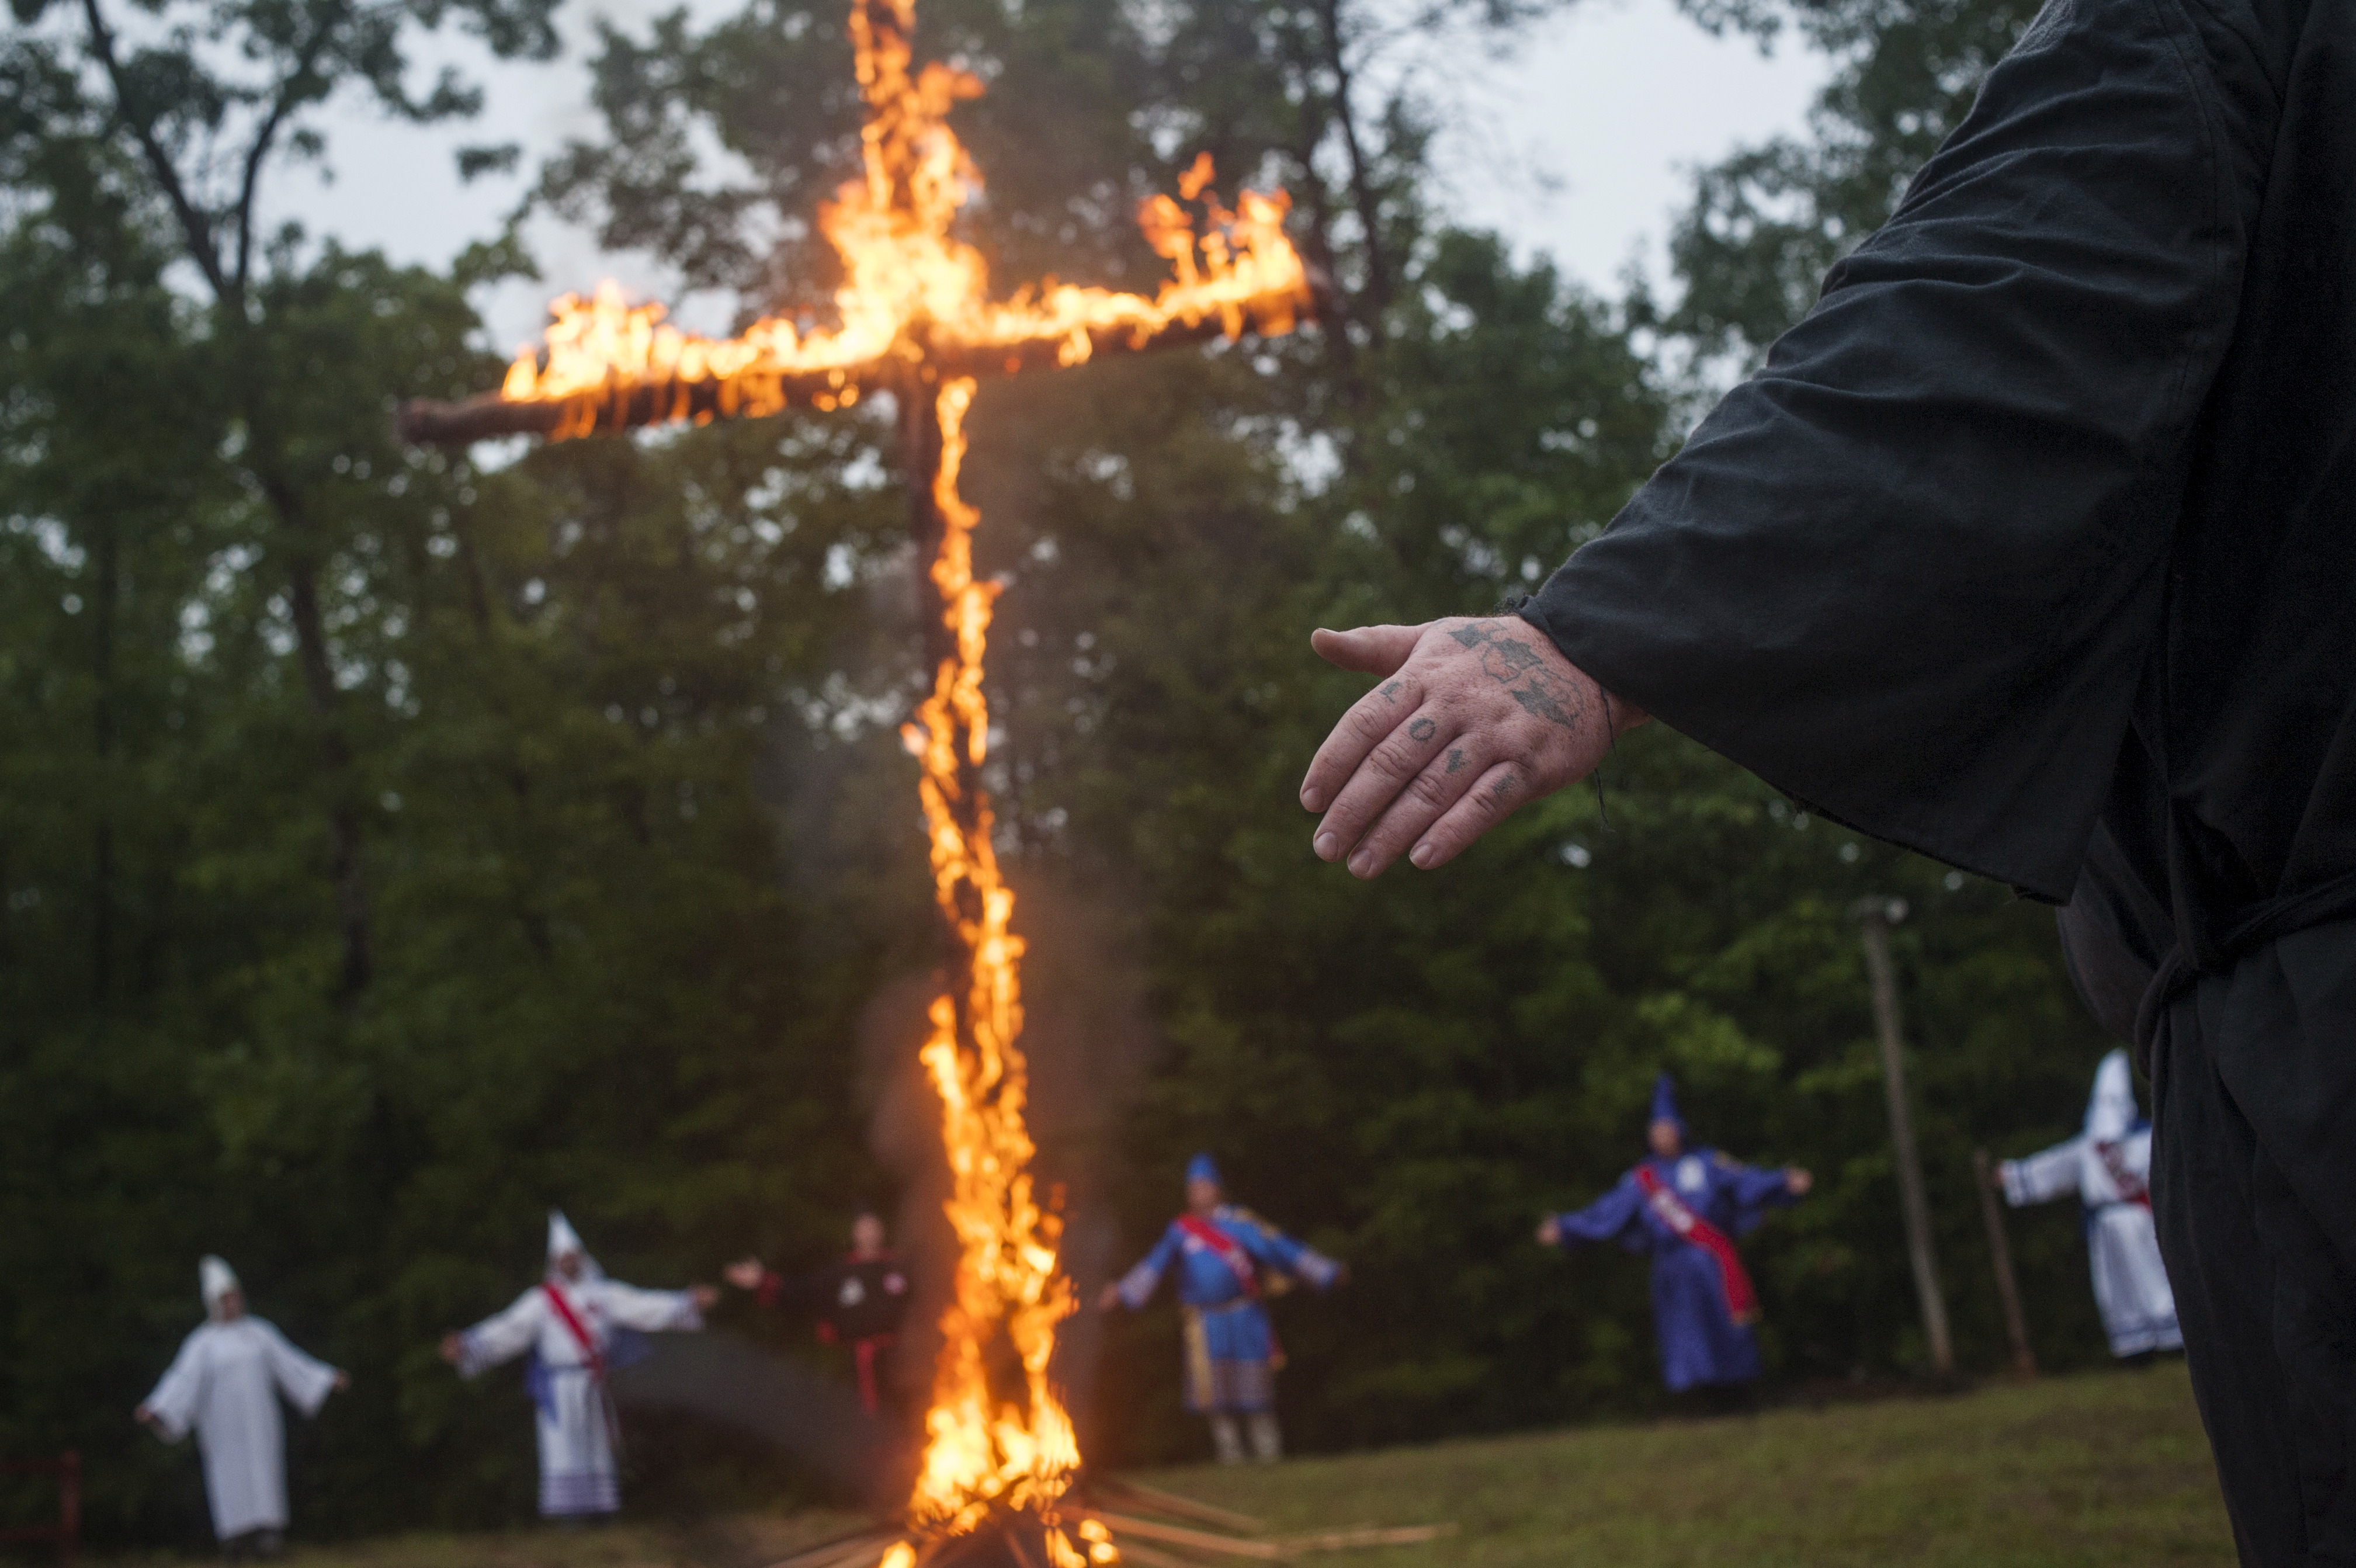 A Klansman with a tattoo on his fingers that reads “Love” participates with members of the Nordic Order Knights and the Rebel Brigade Knights, groups that both claim affiliation with the Ku Klux Klan, in a cross-lighting ceremony on a fellow member’s property in Henry County, Virginia, on August 9, 2014. Source: Johnny Milano/Reuters.